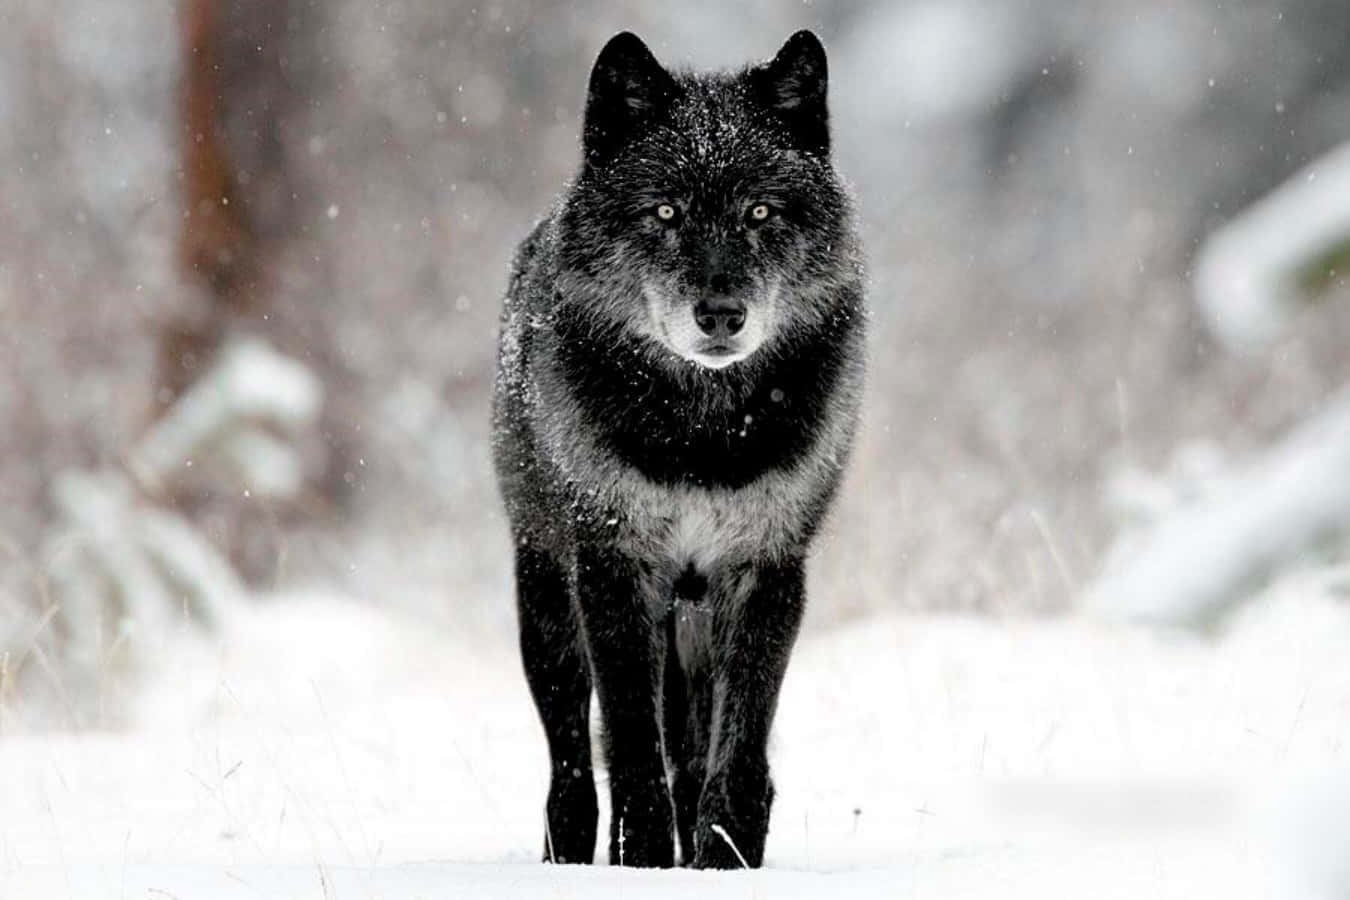 "Lonely yet powerful - the majestic Black Wolf"